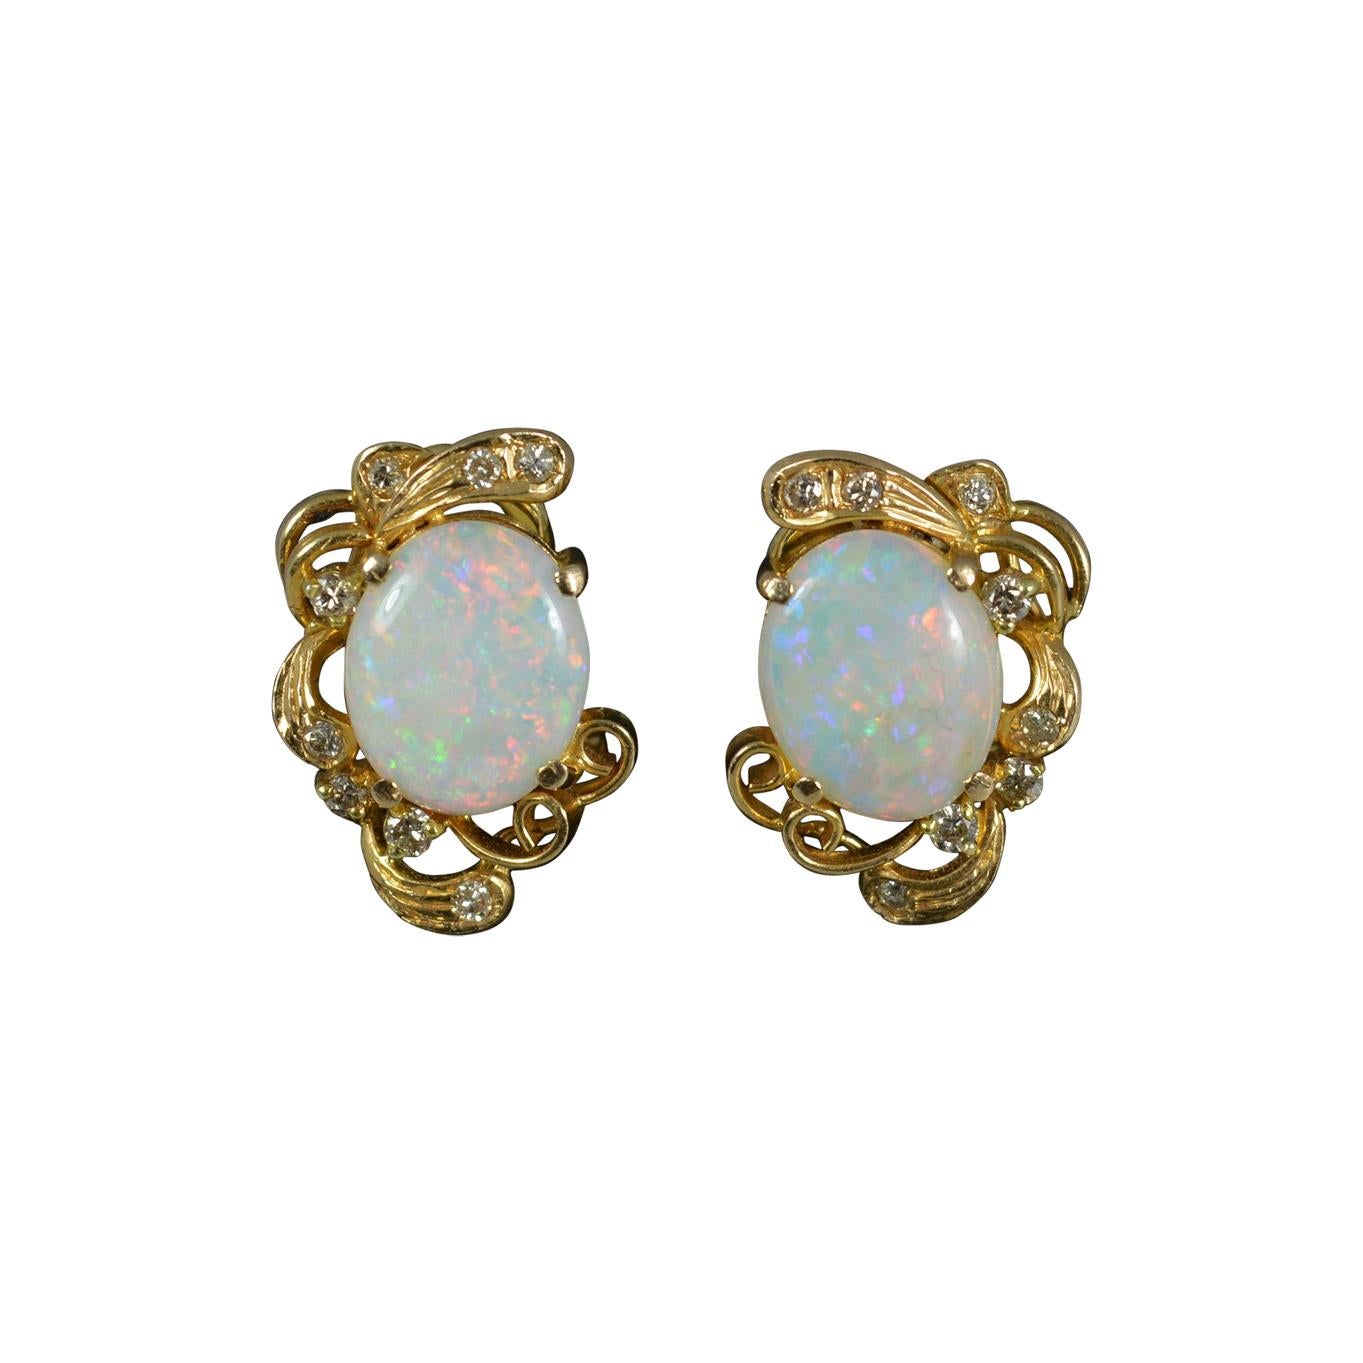 A stunning pair of 14ct Gold, Opal and Diamond cluster earrings.
Solid 14 carat yellow gold example.
Designed with a large oval shaped opal to each. Set in four claw setting. 8mm x 10mm.
Eight small diamonds in a scroll gold surround.
12mm x 18mm